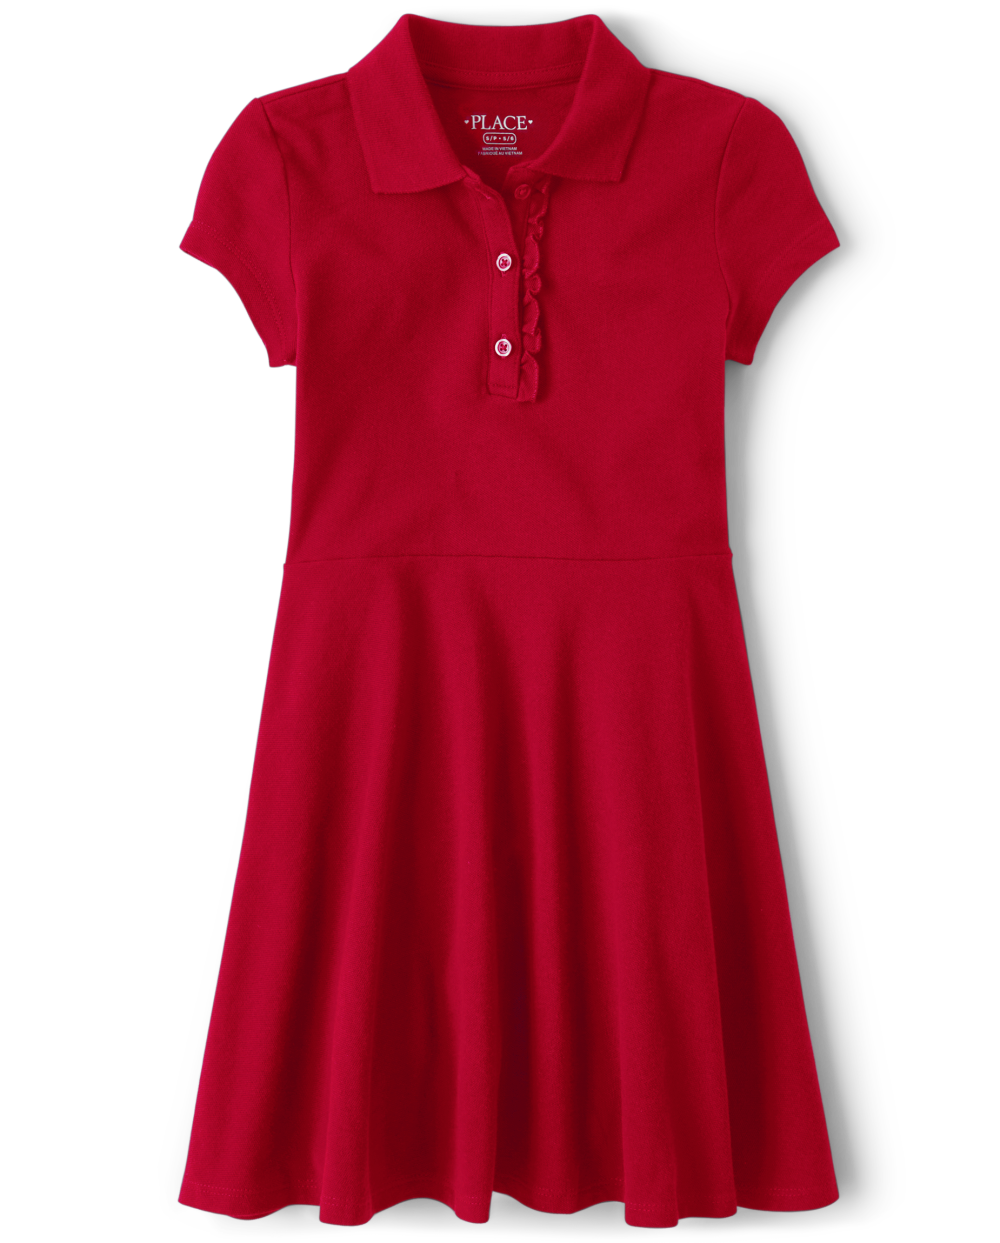 Girls Above the Knee Ruffle Trim Short Sleeves Sleeves Collared Dress